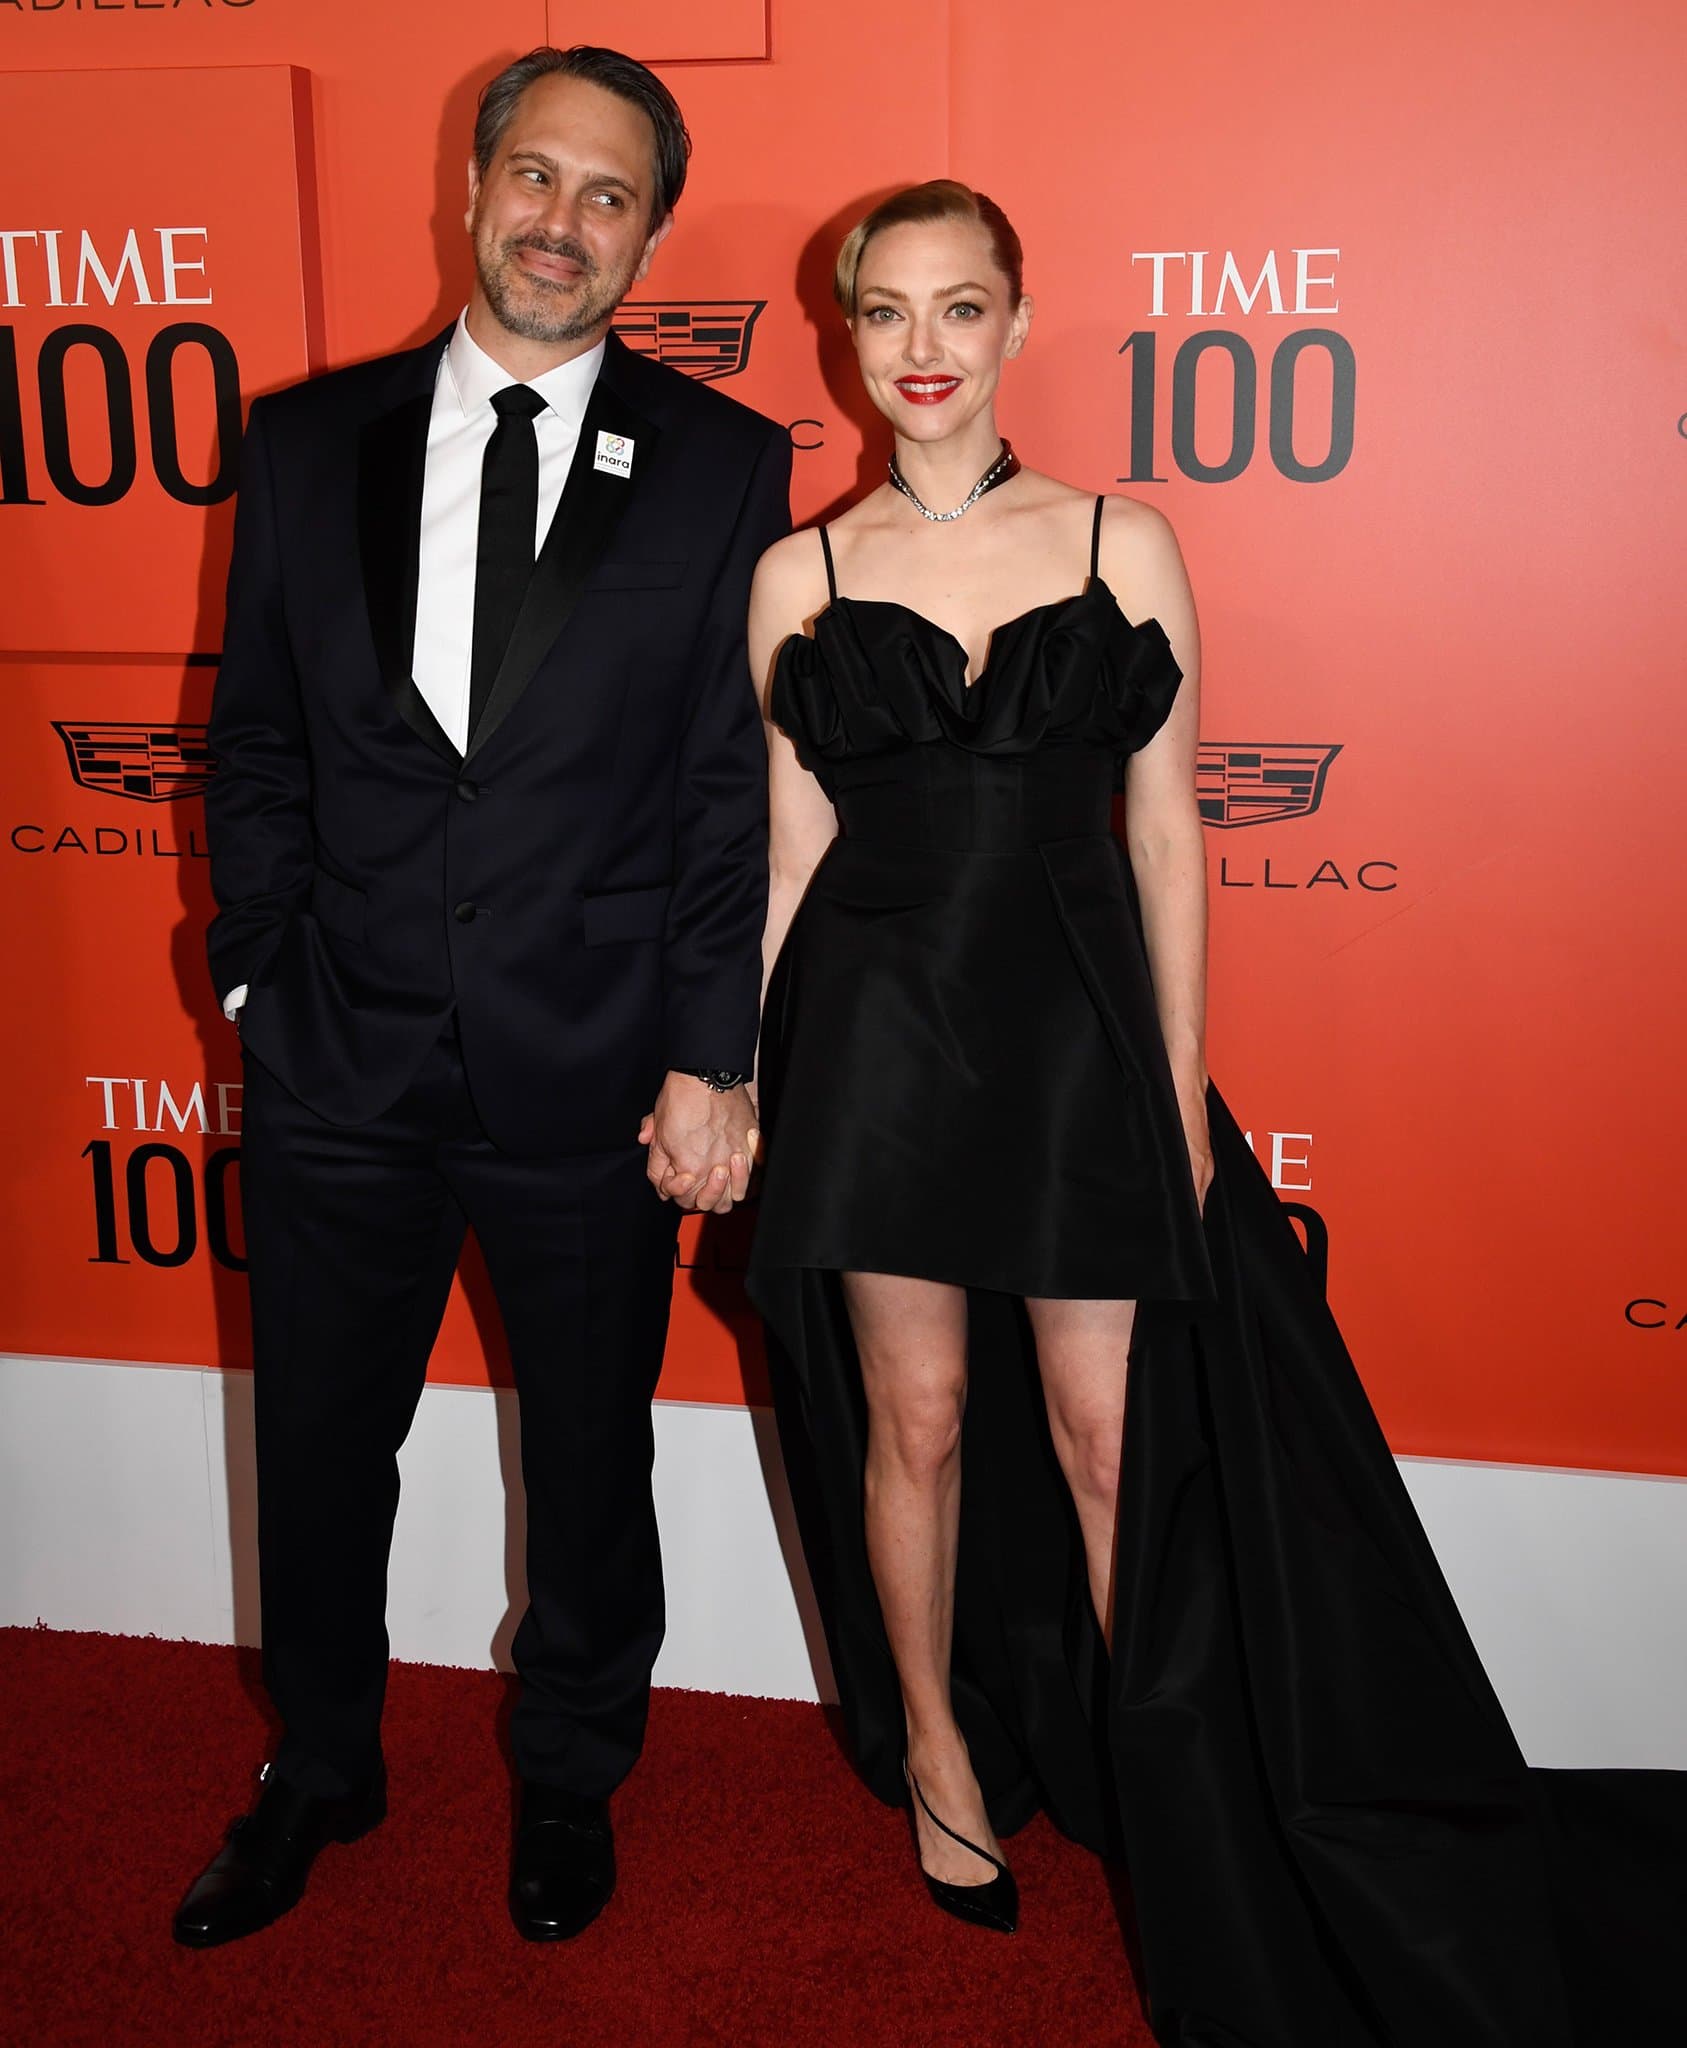 Thomas Sadoski joins her wife Amanda Seyfried in a black suit styled with black dress shoes and an INARA pin